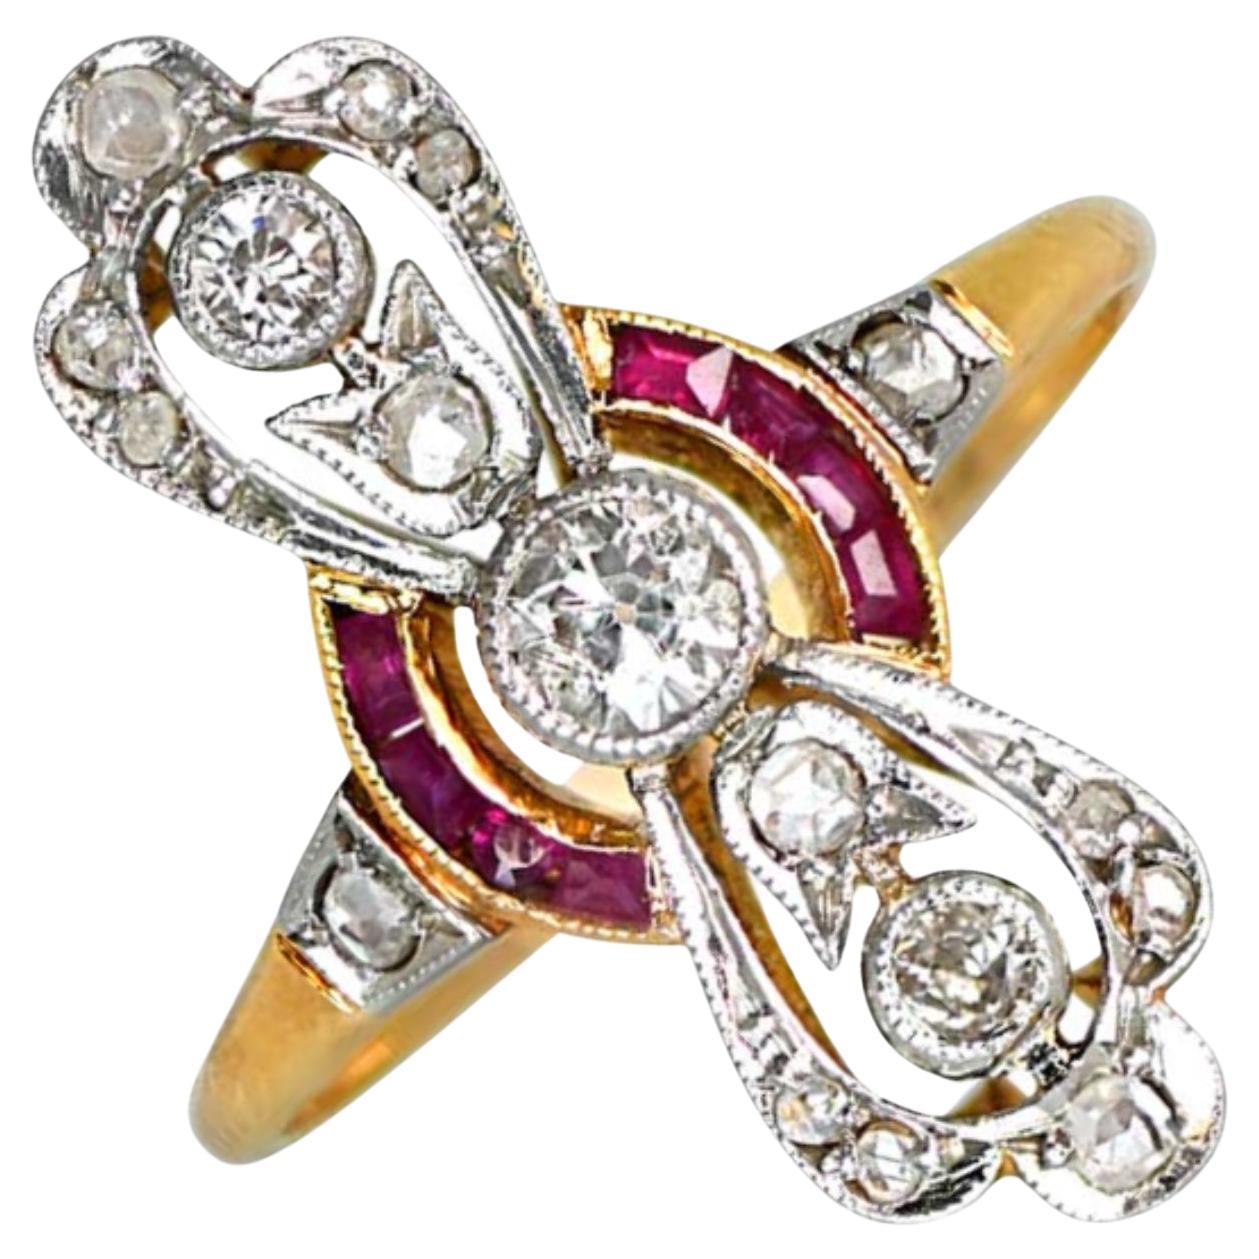 Antique 0.15ct Old European Cut Diamond Cocktail Ring, Platinum &18k Yellow Gold For Sale